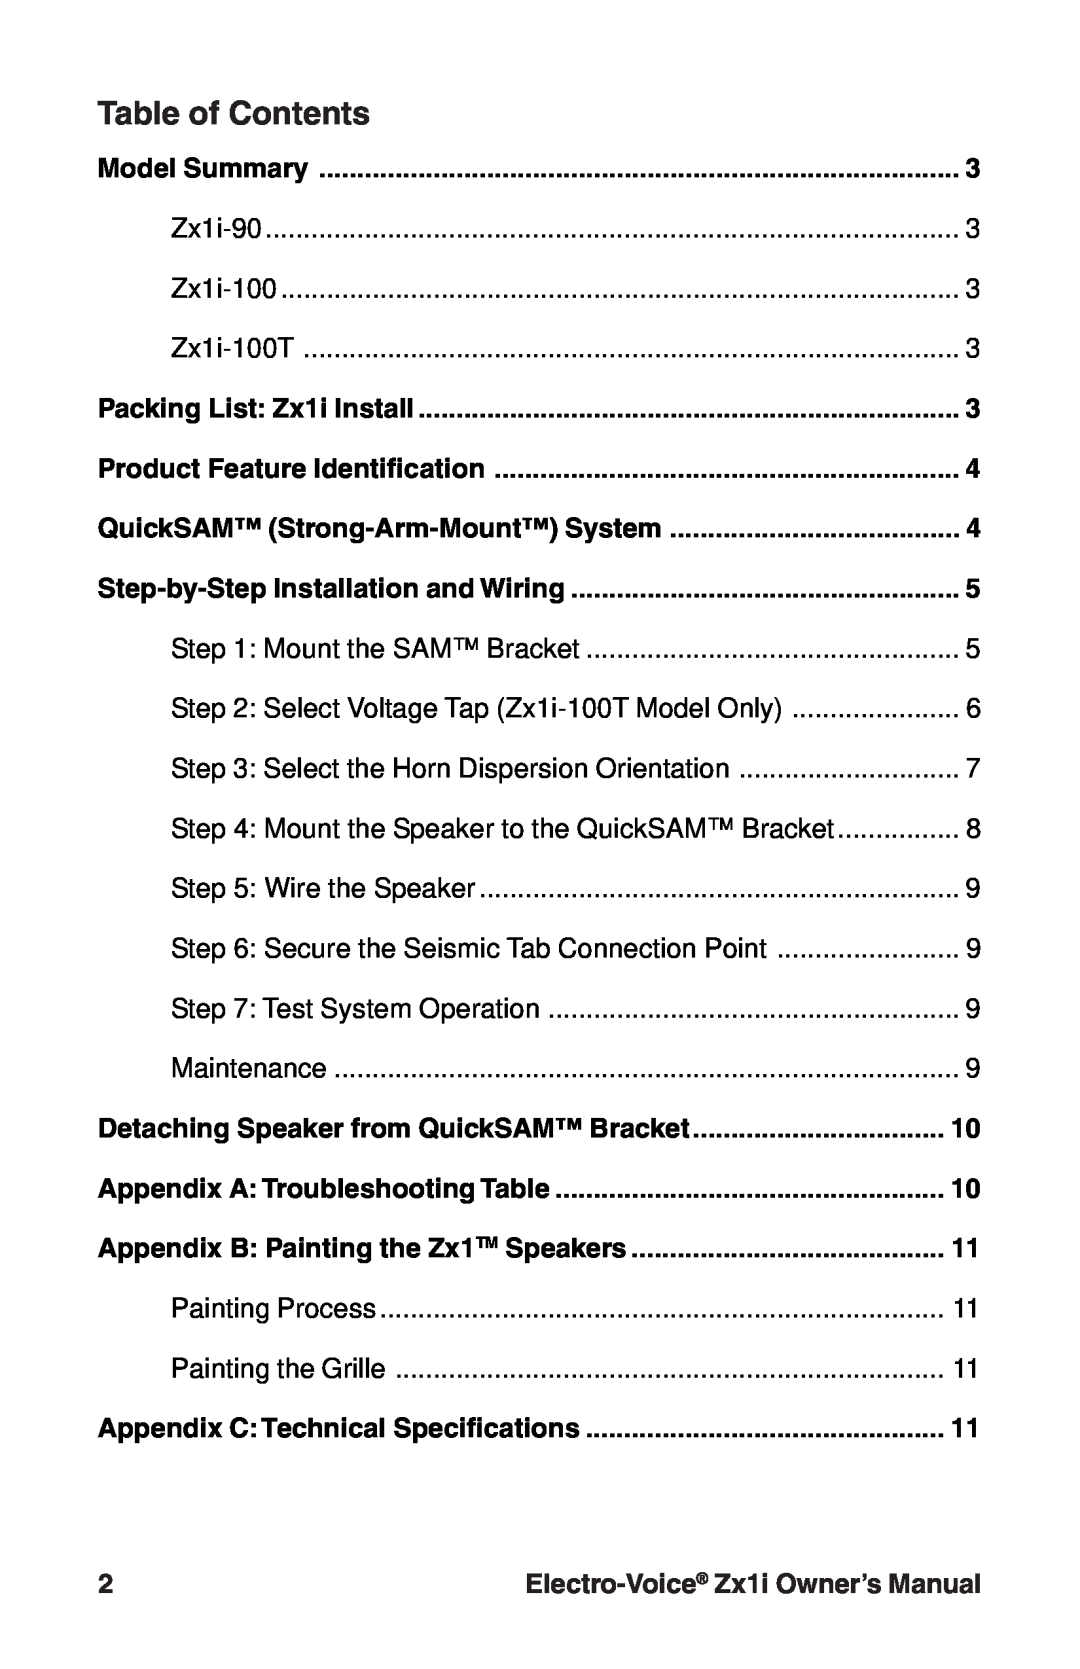 Electro-Voice Zx1i-90, Zx1i-100T owner manual Table of Contents, Electro-Voice Zx1i Owner’s Manual 